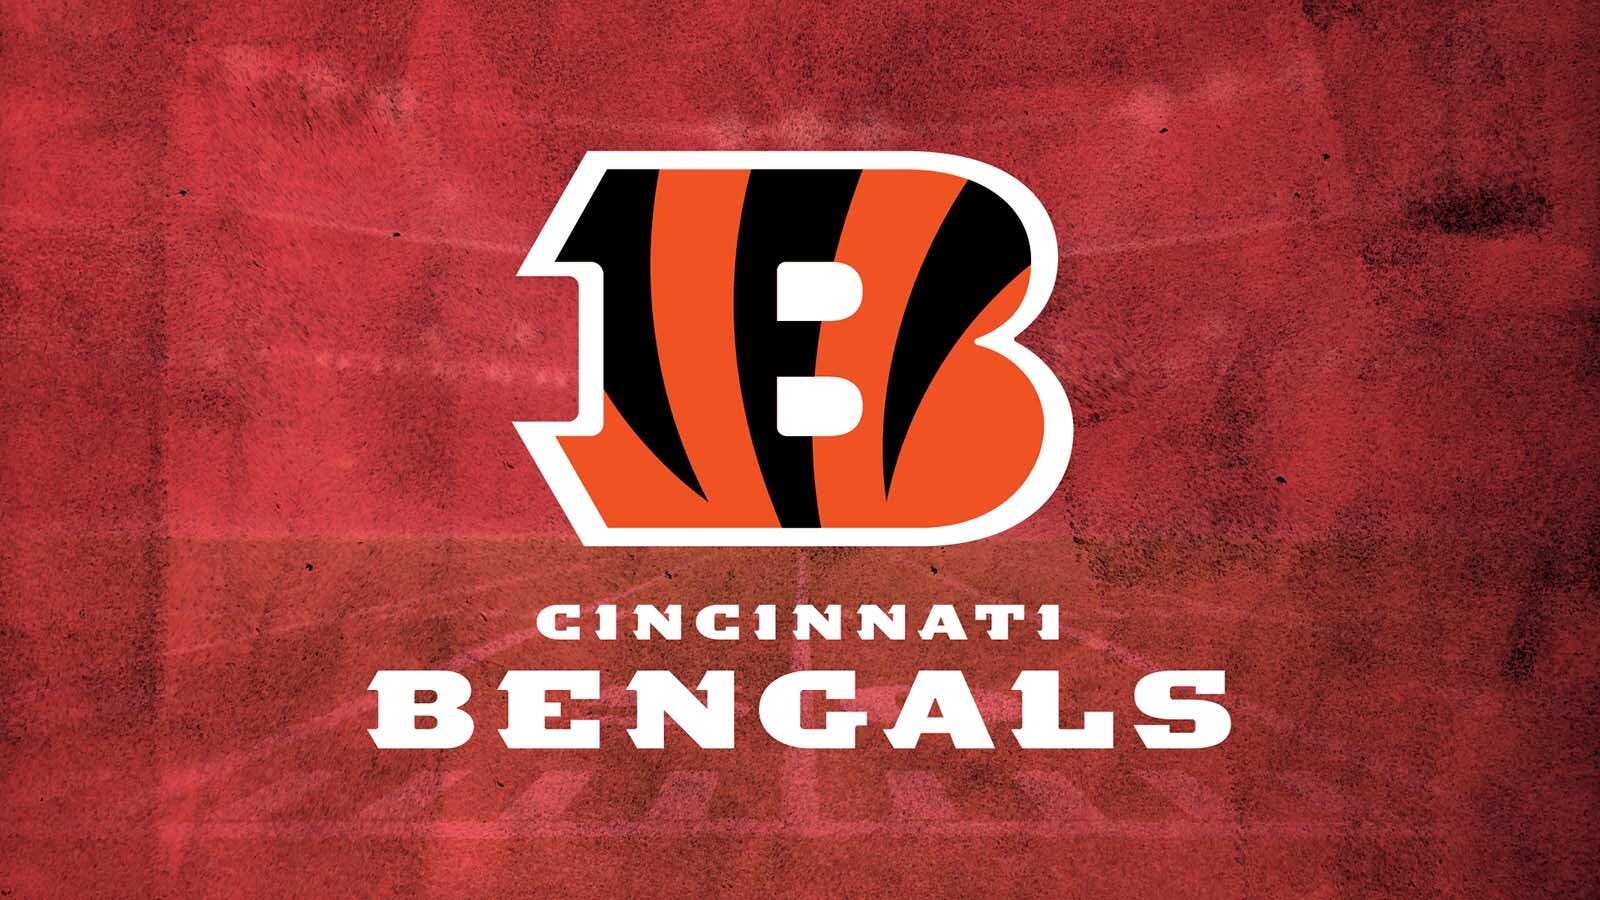 how can i watch the bengals game for free